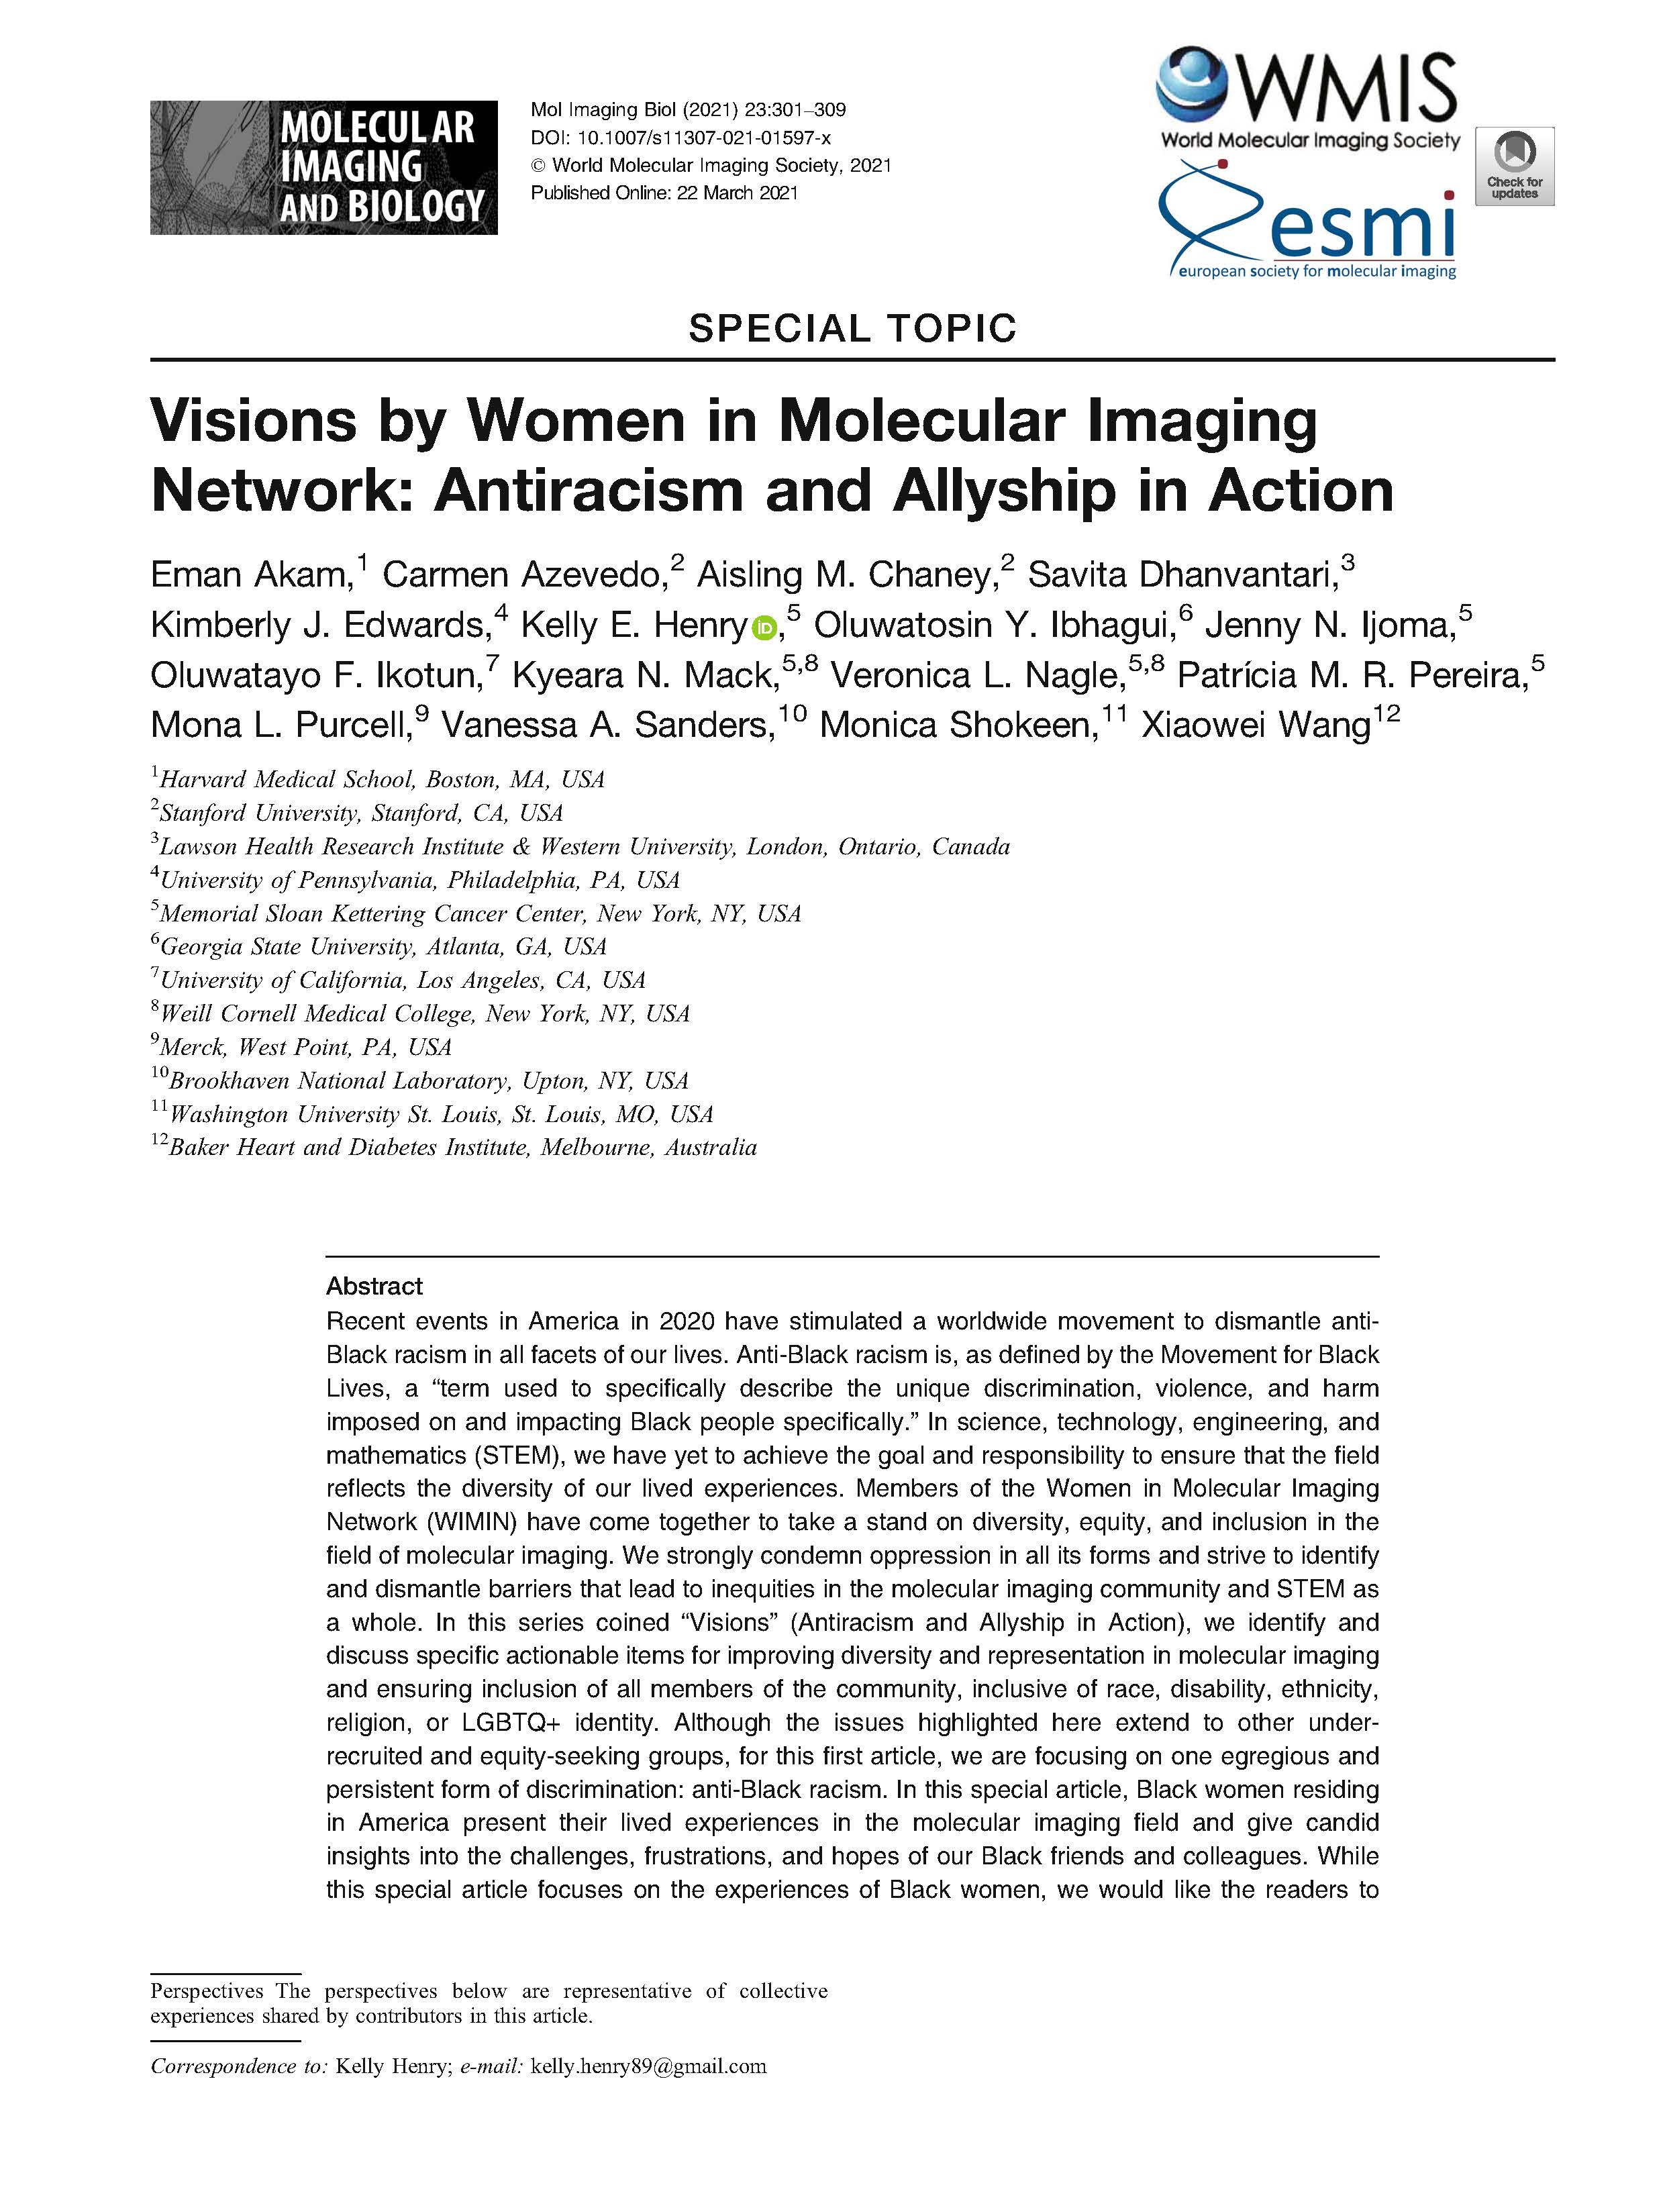 Visions by Women in Molecular Imaging Network: Antiracism and Allyship in Action